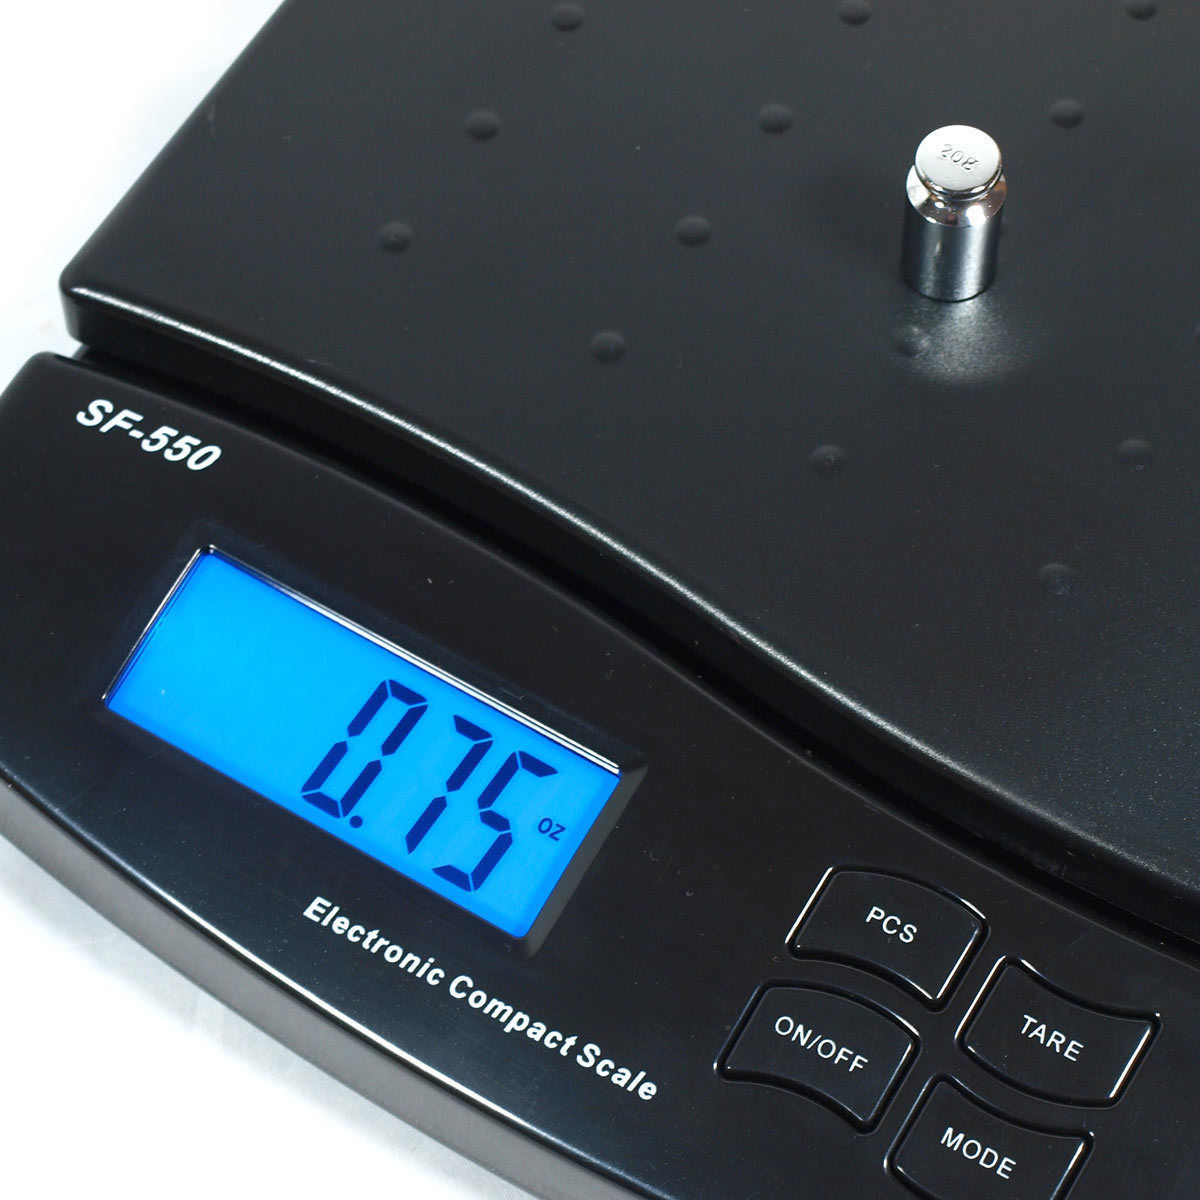 Angel POS Digital 50 lb x 0.2 oz Postal Table Shipping Scale with Large Display, Envelope Stand & USB Power Cable